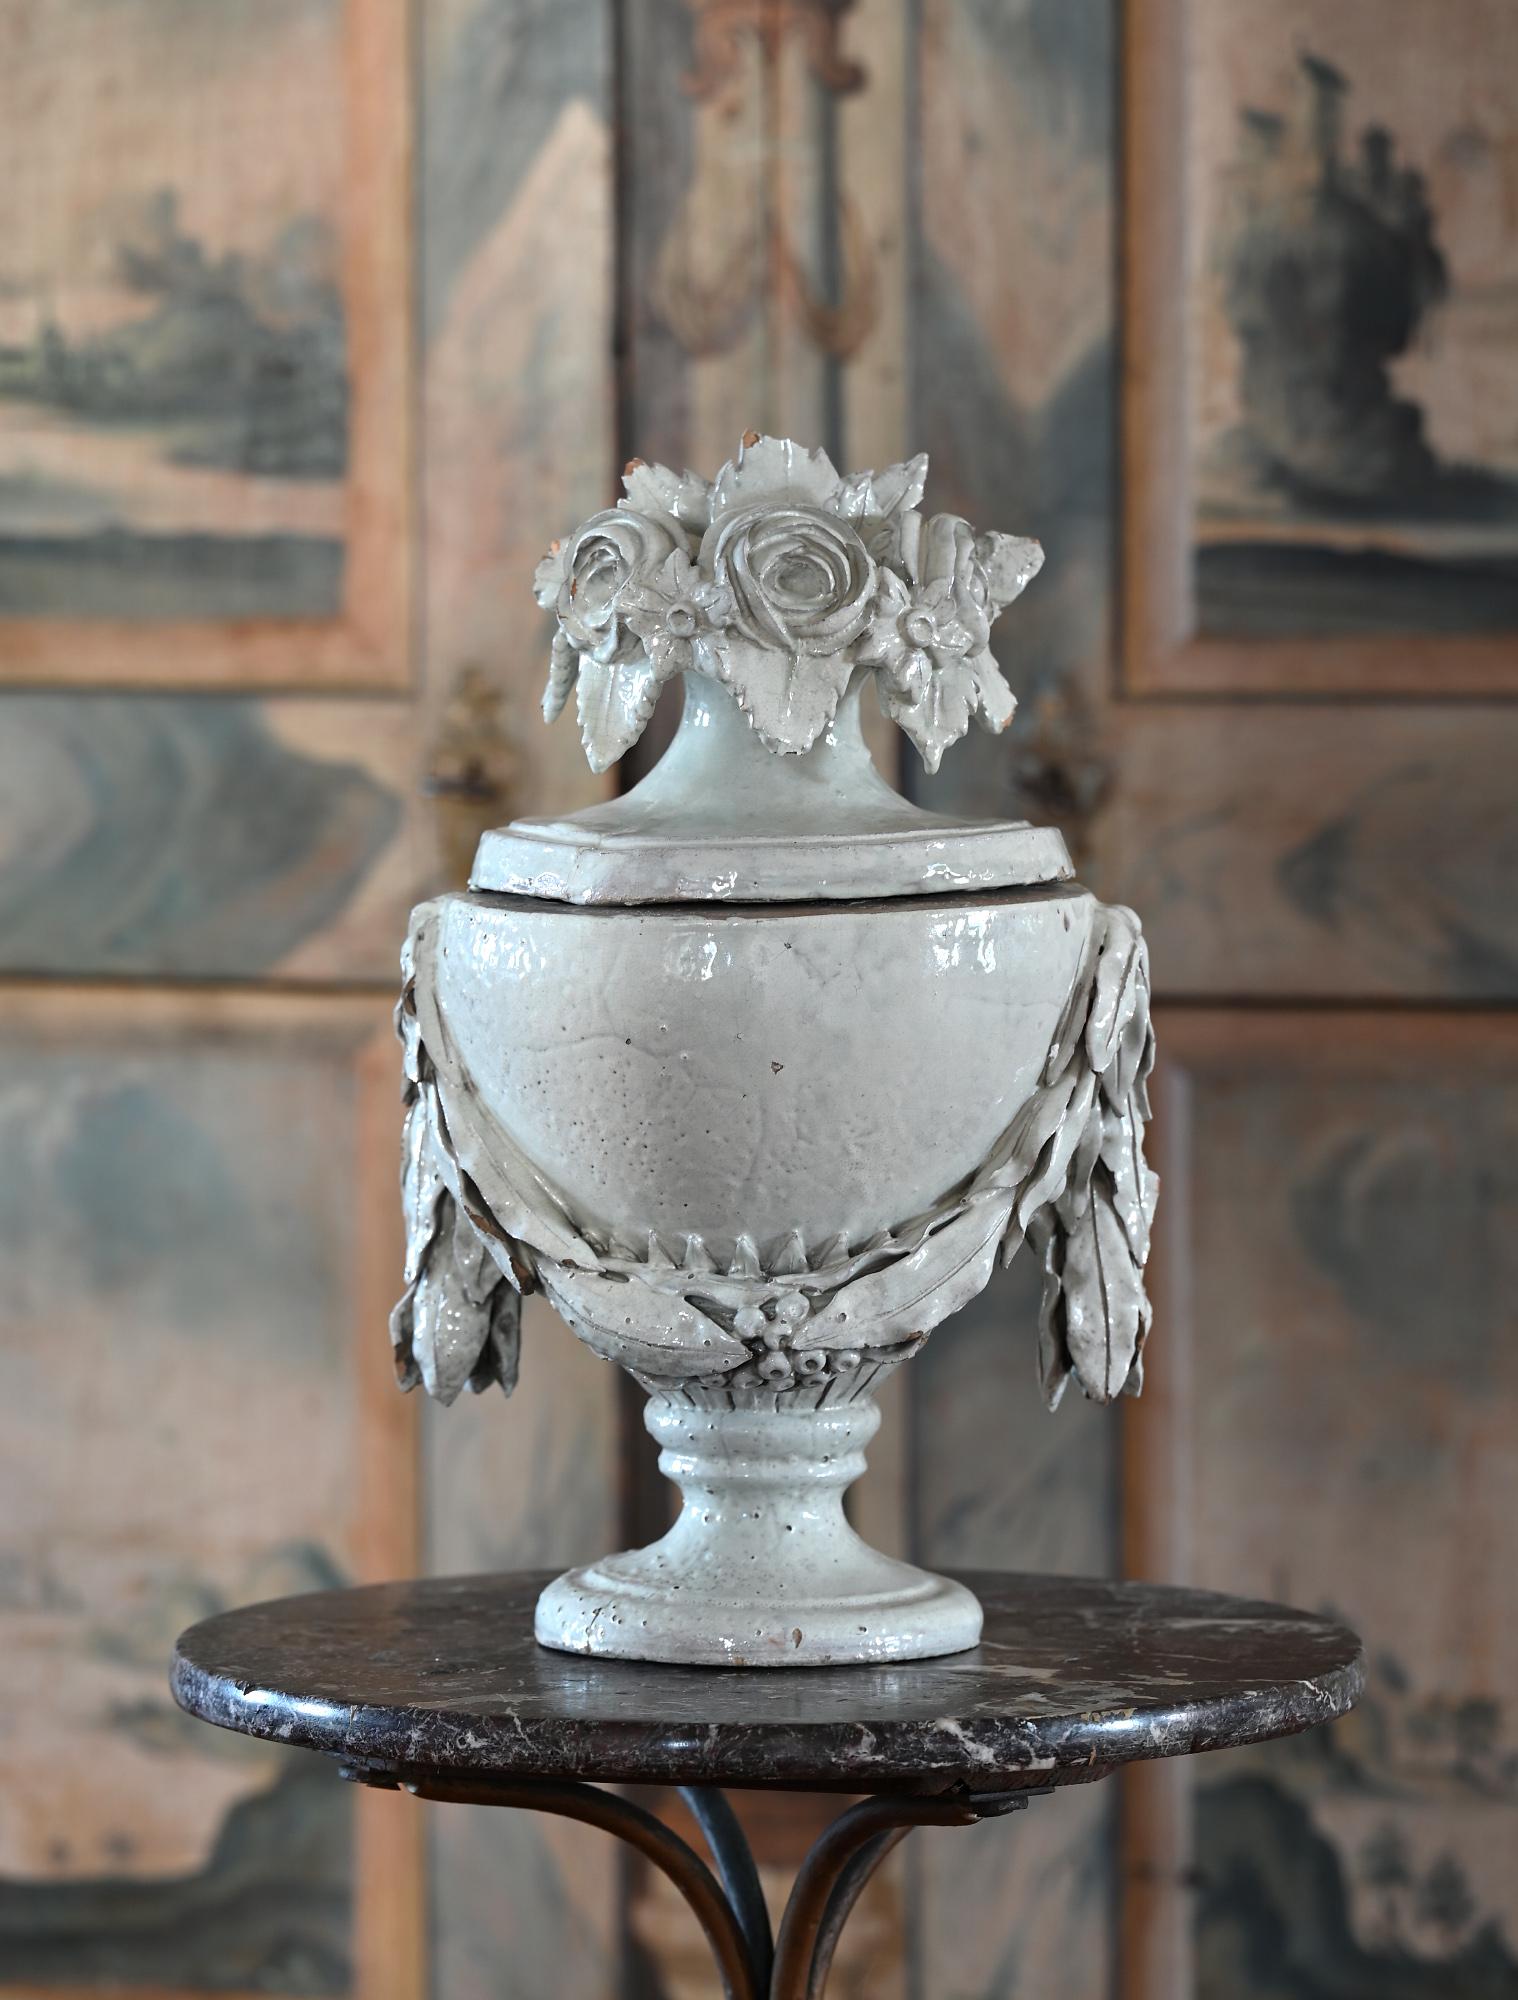 Special faience vase with lid, German, circa 1780.
The rare vase is white glazed and very nicely shaped.
The lid vase is an very decorative object.